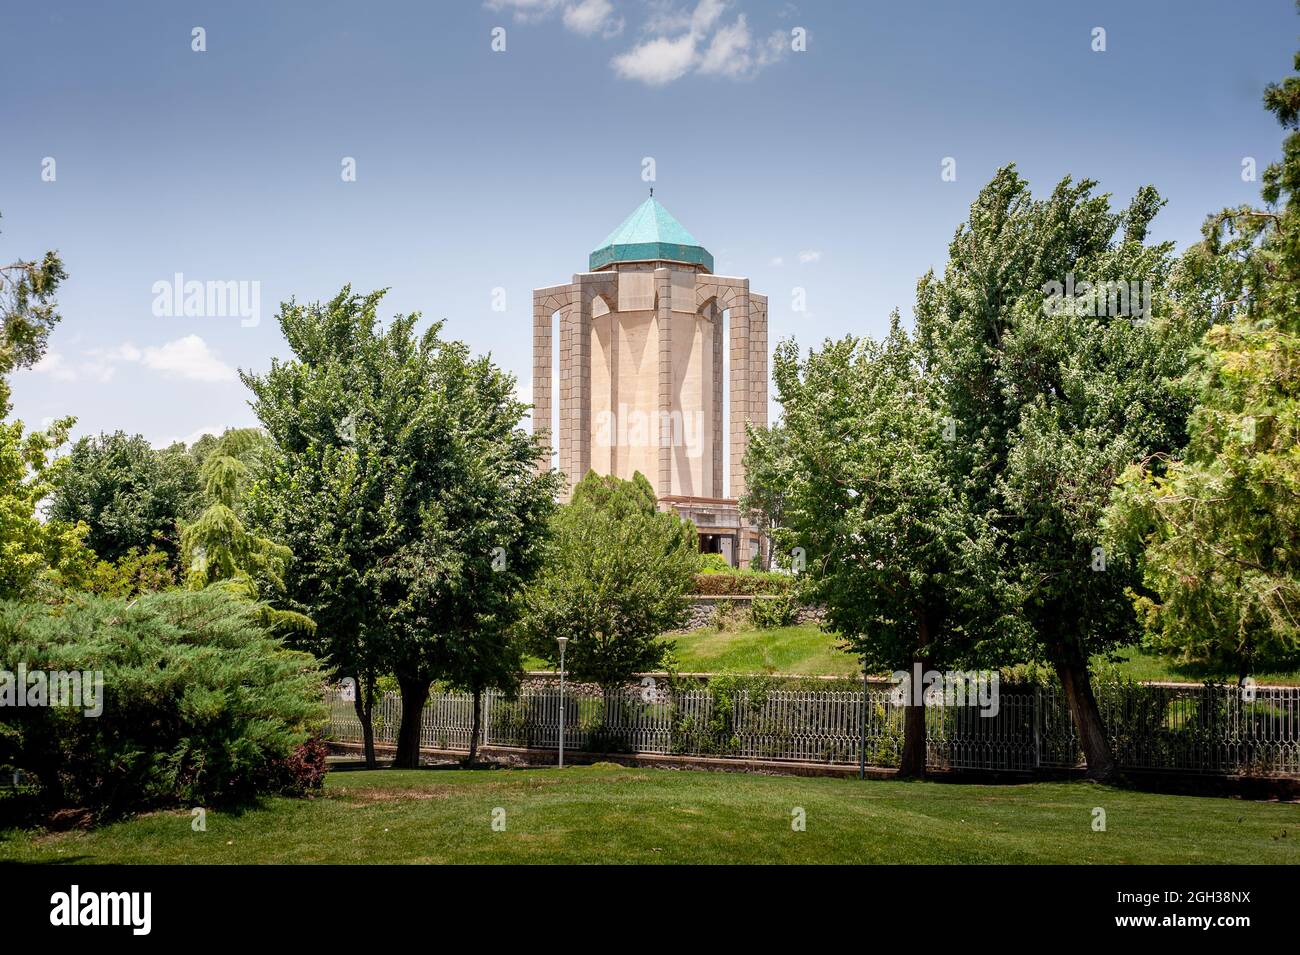 view from the Mausoleum of Baba Taher, Baba Taher Oryan Hamadani one of the most revered early poets in Persian literature. hamadan province. iran Stock Photo